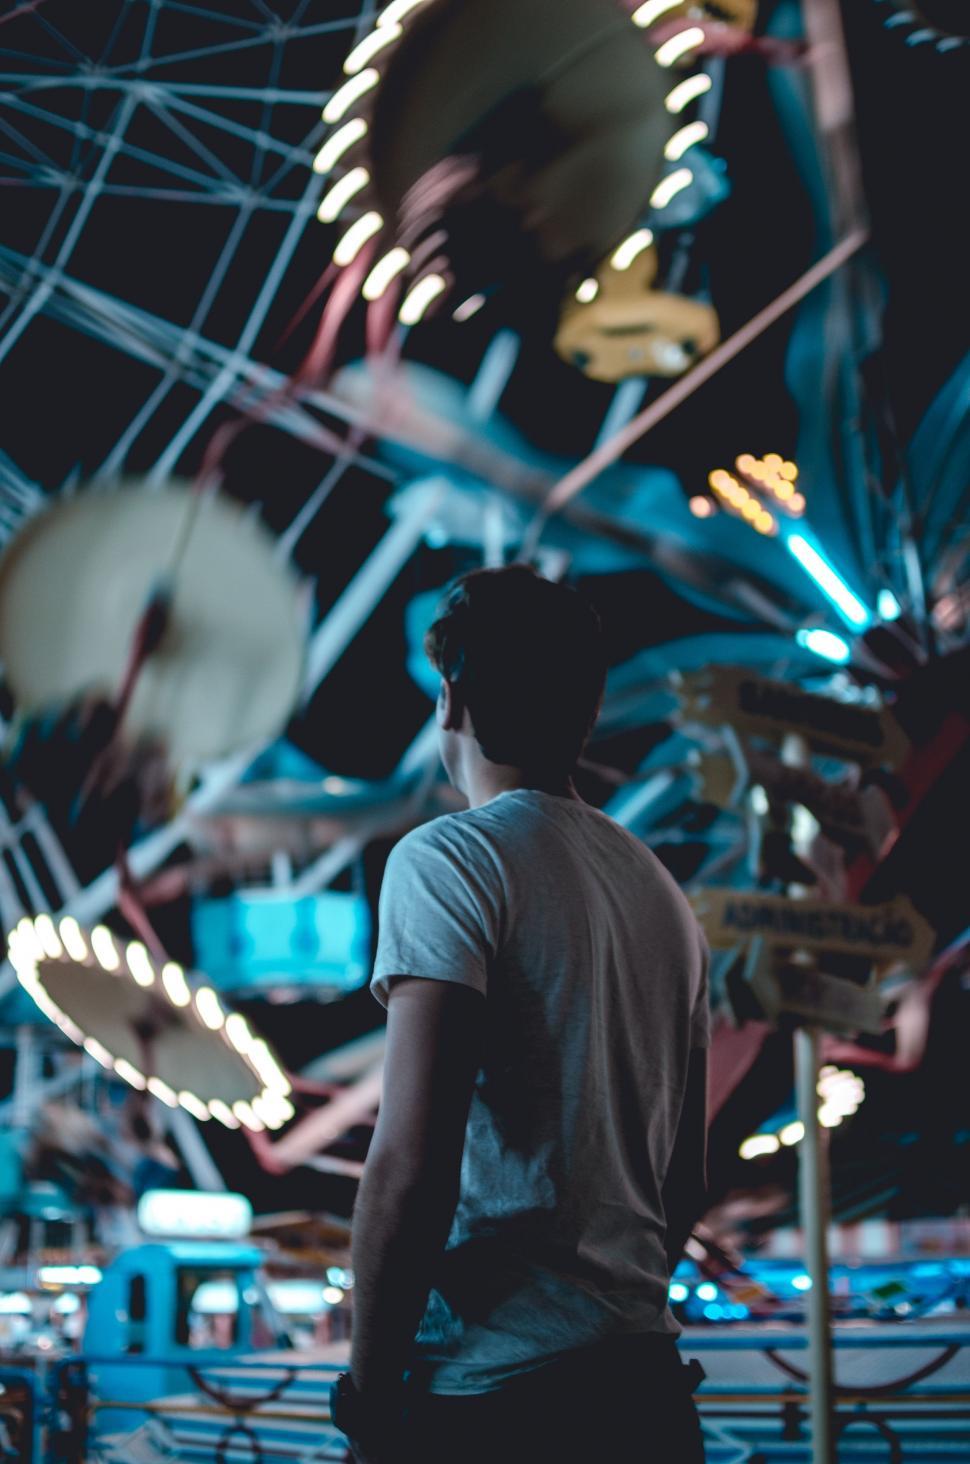 Free Image of Man Standing in Front of Carousel at Night 